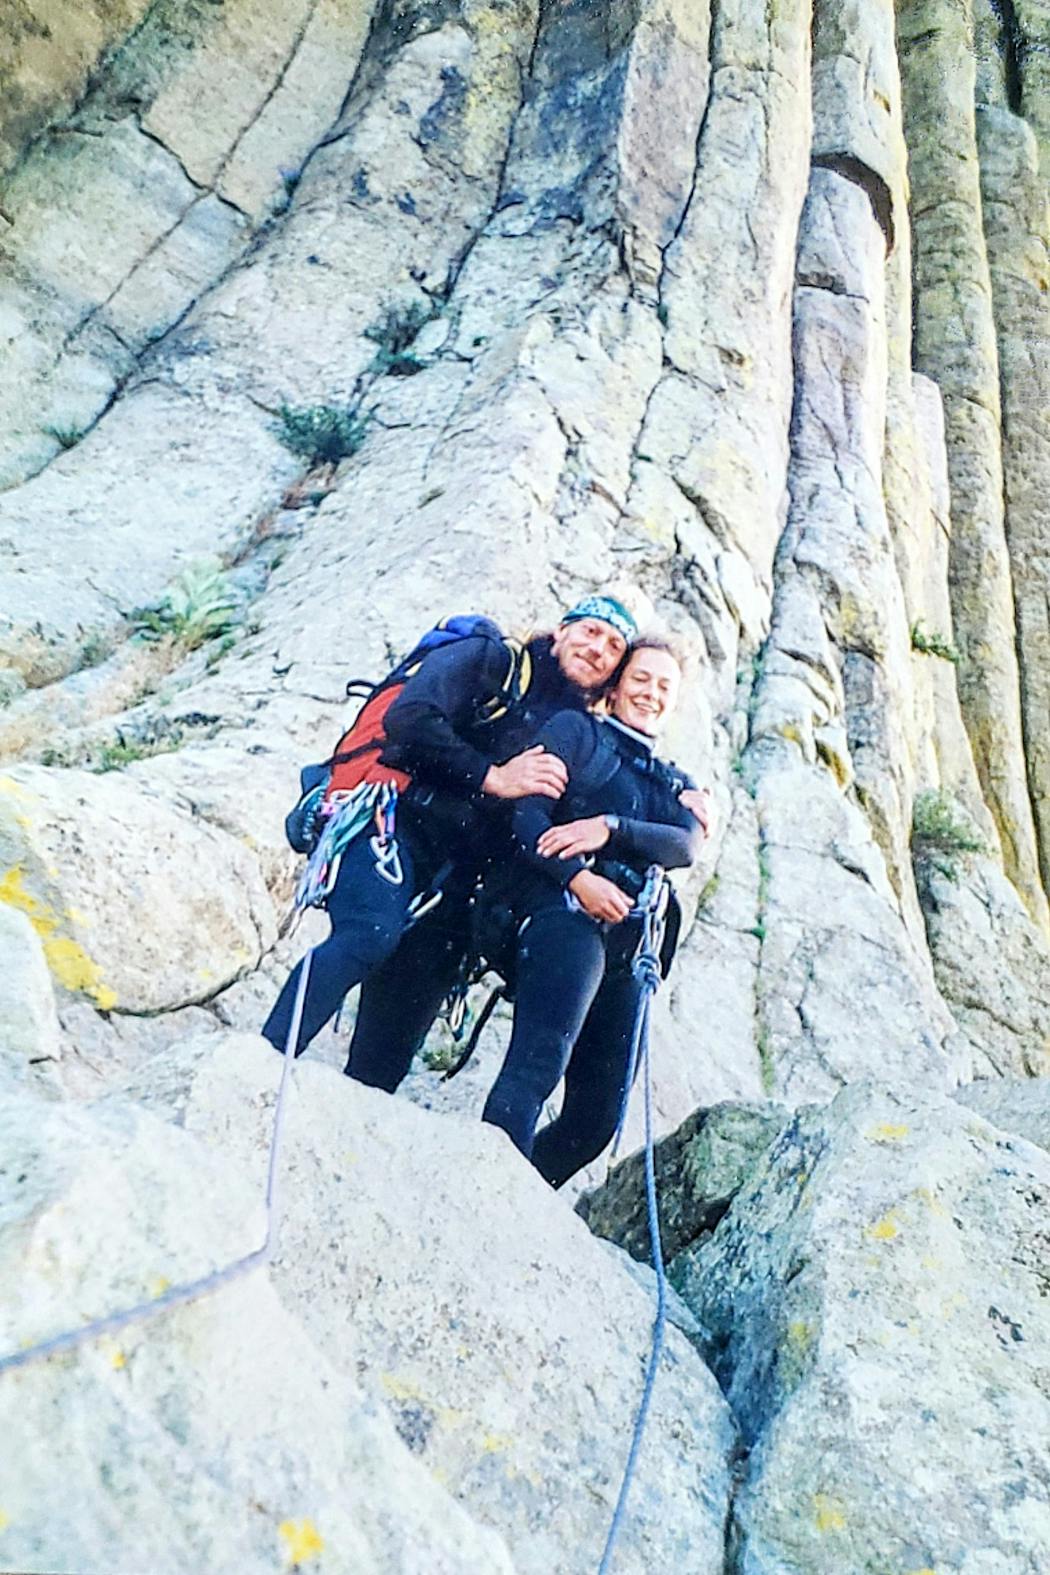 Pat Mackin and Jeanine Brudenell on one of their many climbing adventures together.